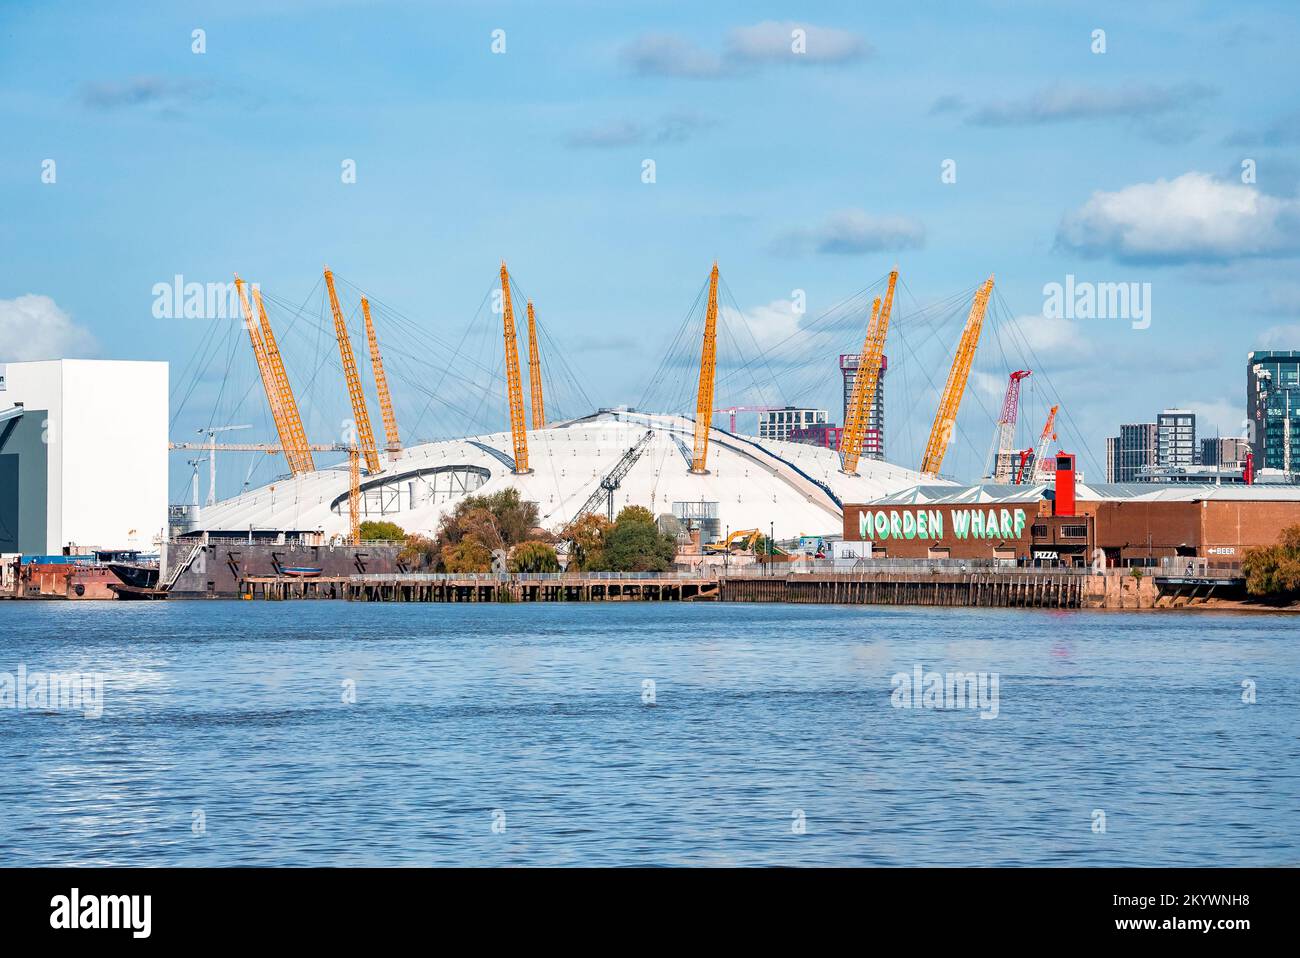 Close up view of the Millennium Dome in London, England. Stock Photo